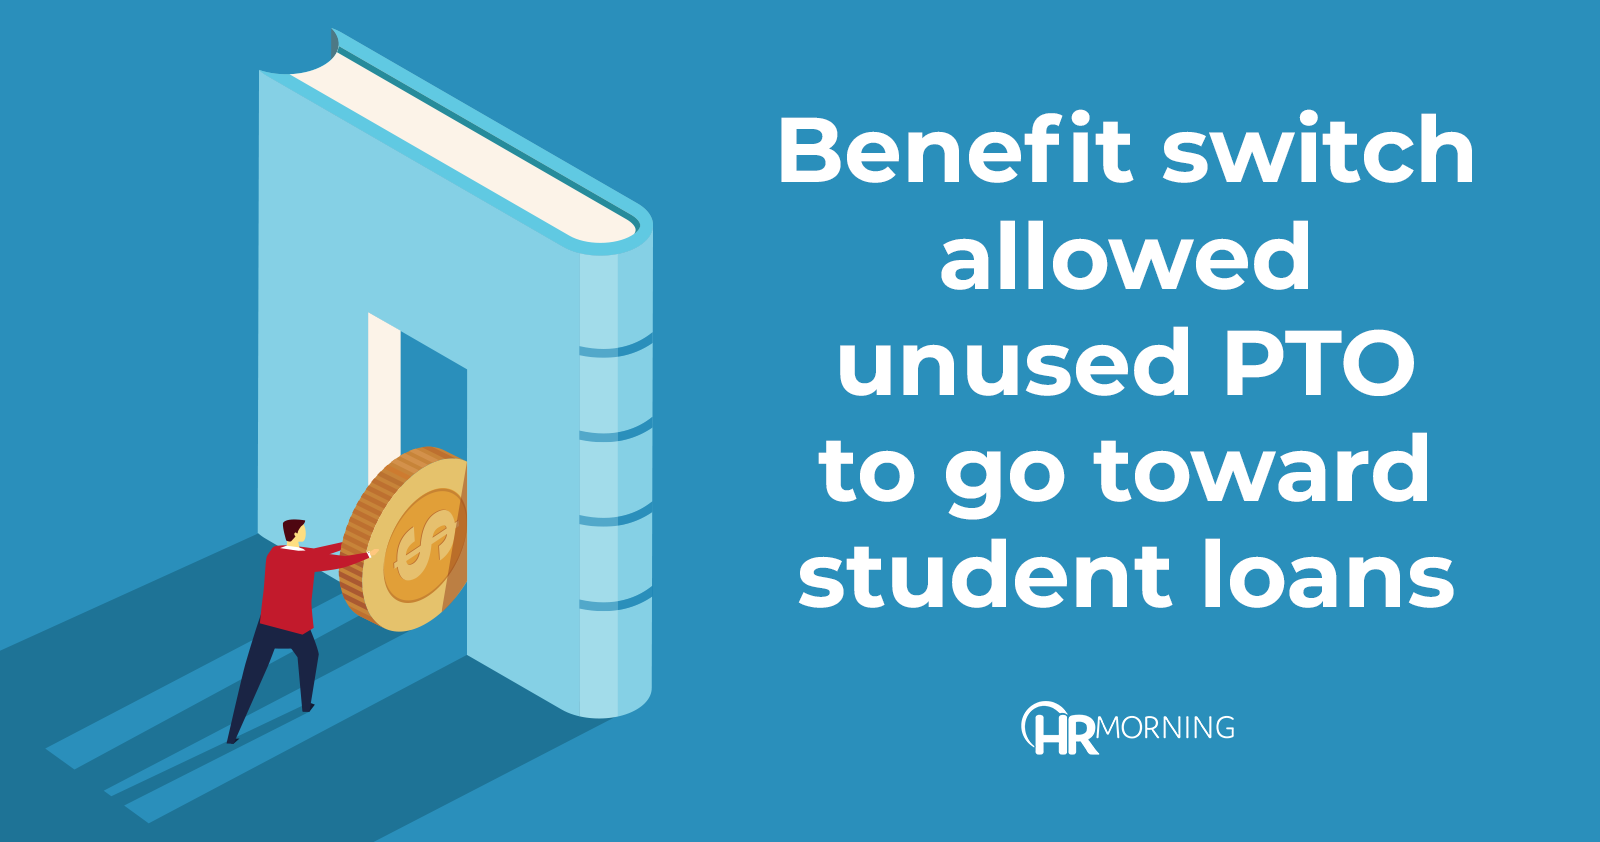 Benefit switch allowed unused PTO to go toward student loans